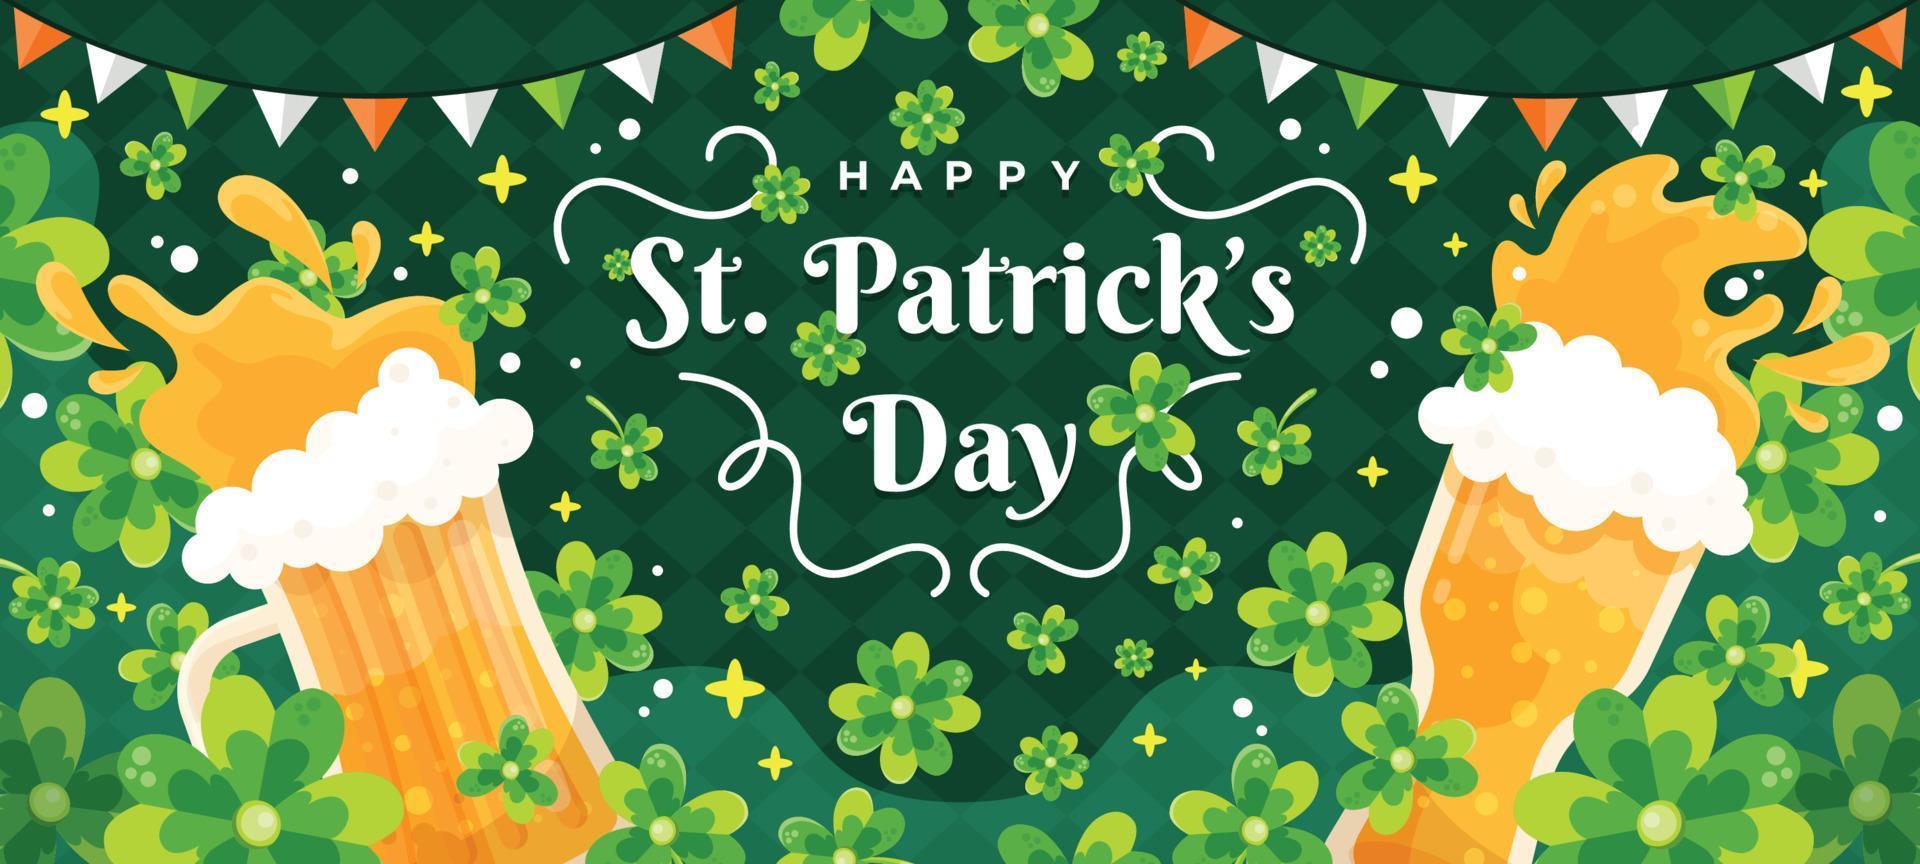 St. Patrick's Day Celebration with Beer and Clovers vector